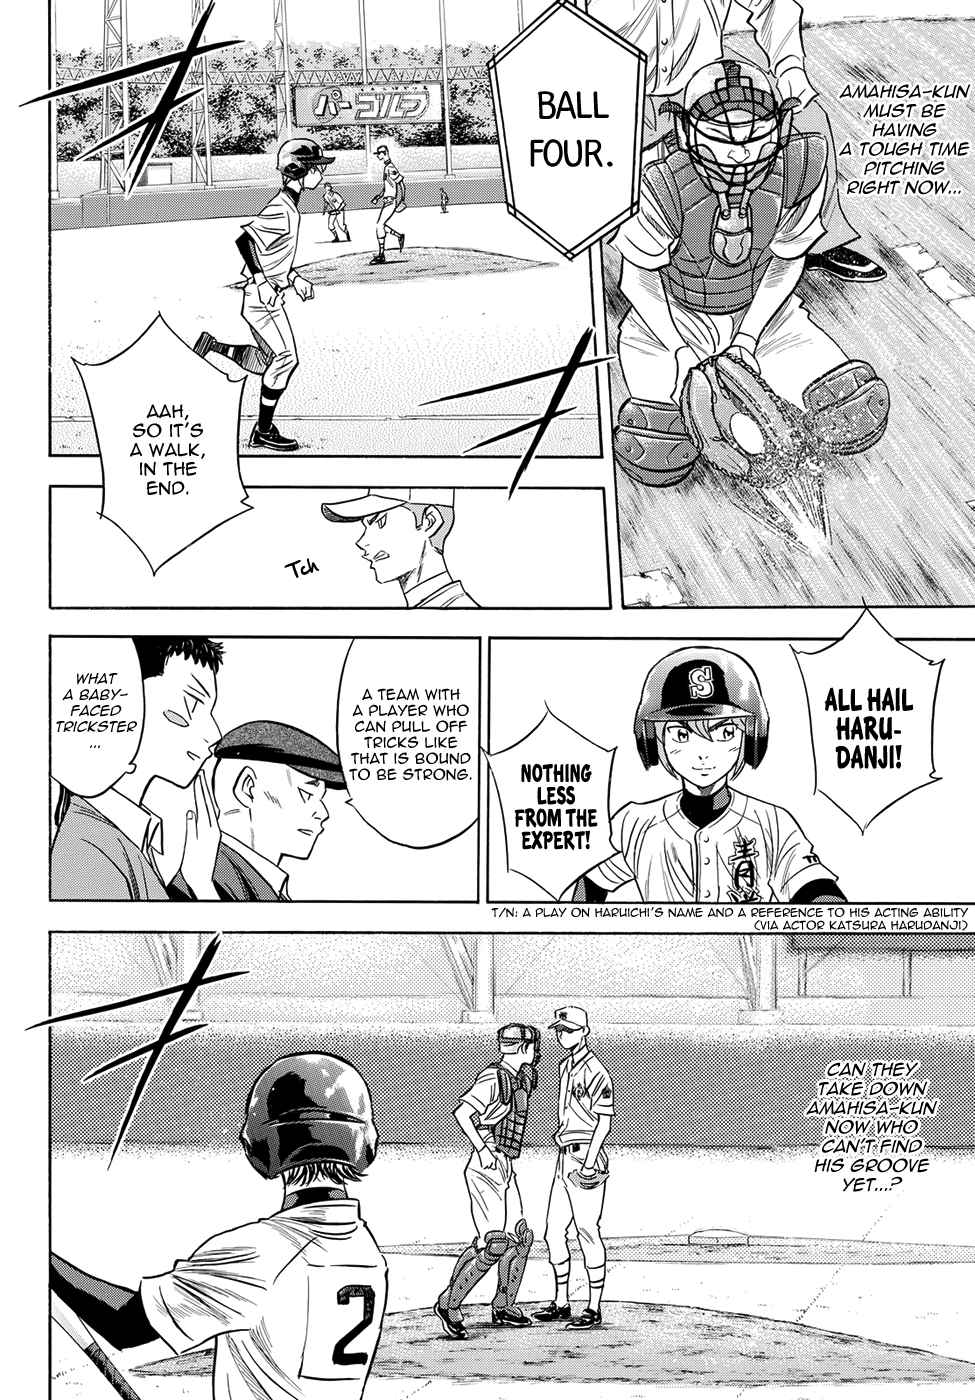 Diamond no Ace Act II Vol. 5 Ch. 38 The First Inning's Offense and Defense